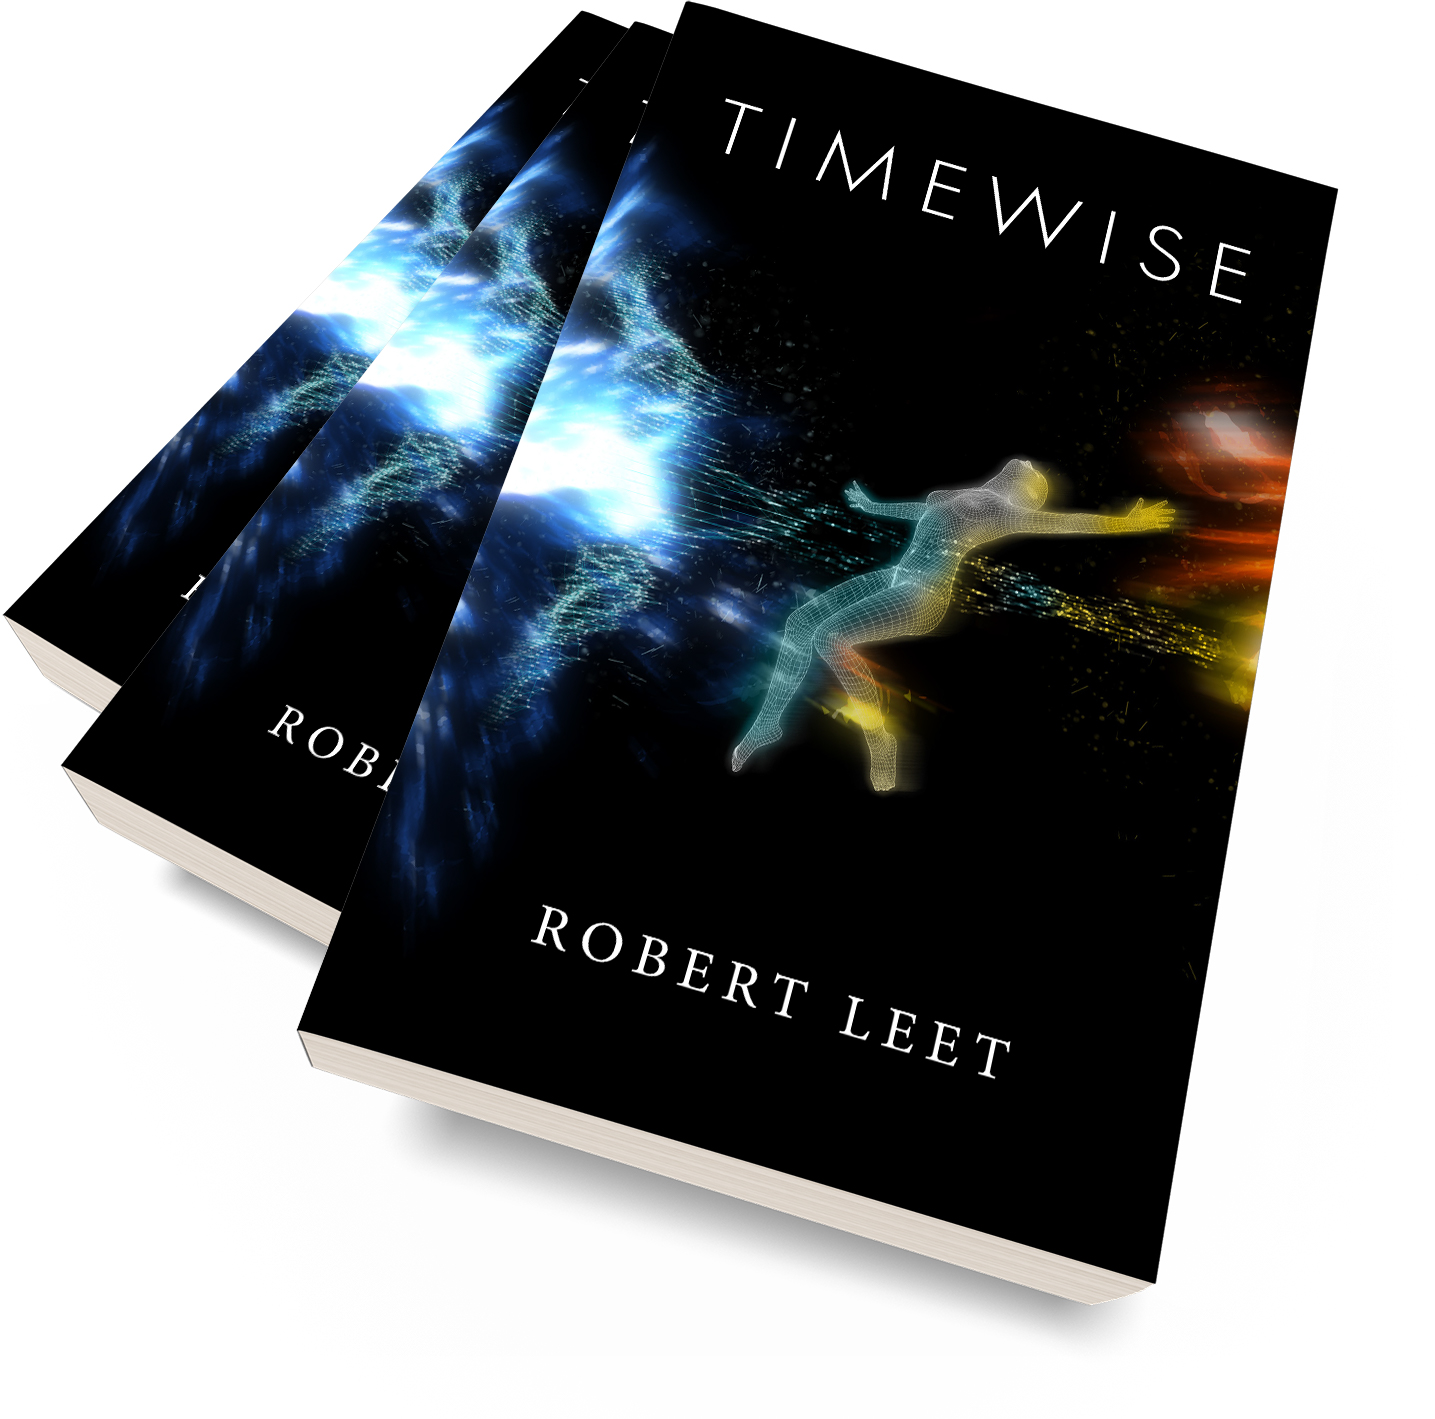 'Timewise' is temporally-fractured scifi novel by author Robert Leet. The book cover was designed by Mark Thomas, of coverness.com. To find out more about my book design services, please visit www.coverness.com.